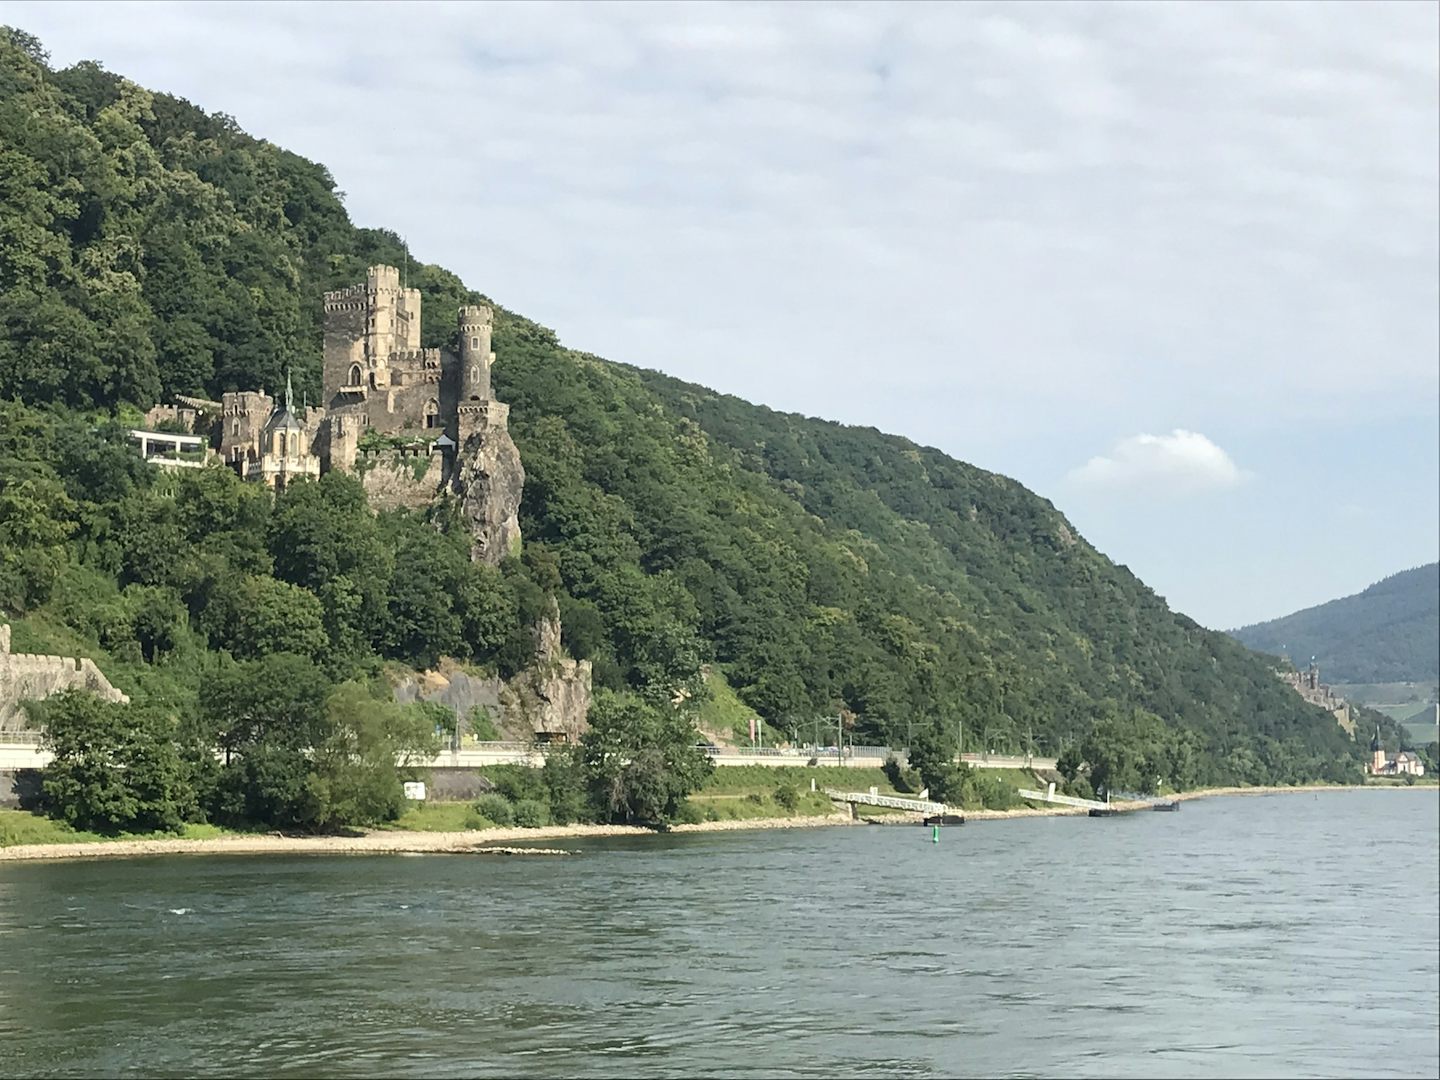 One of many castles along the Rhine River